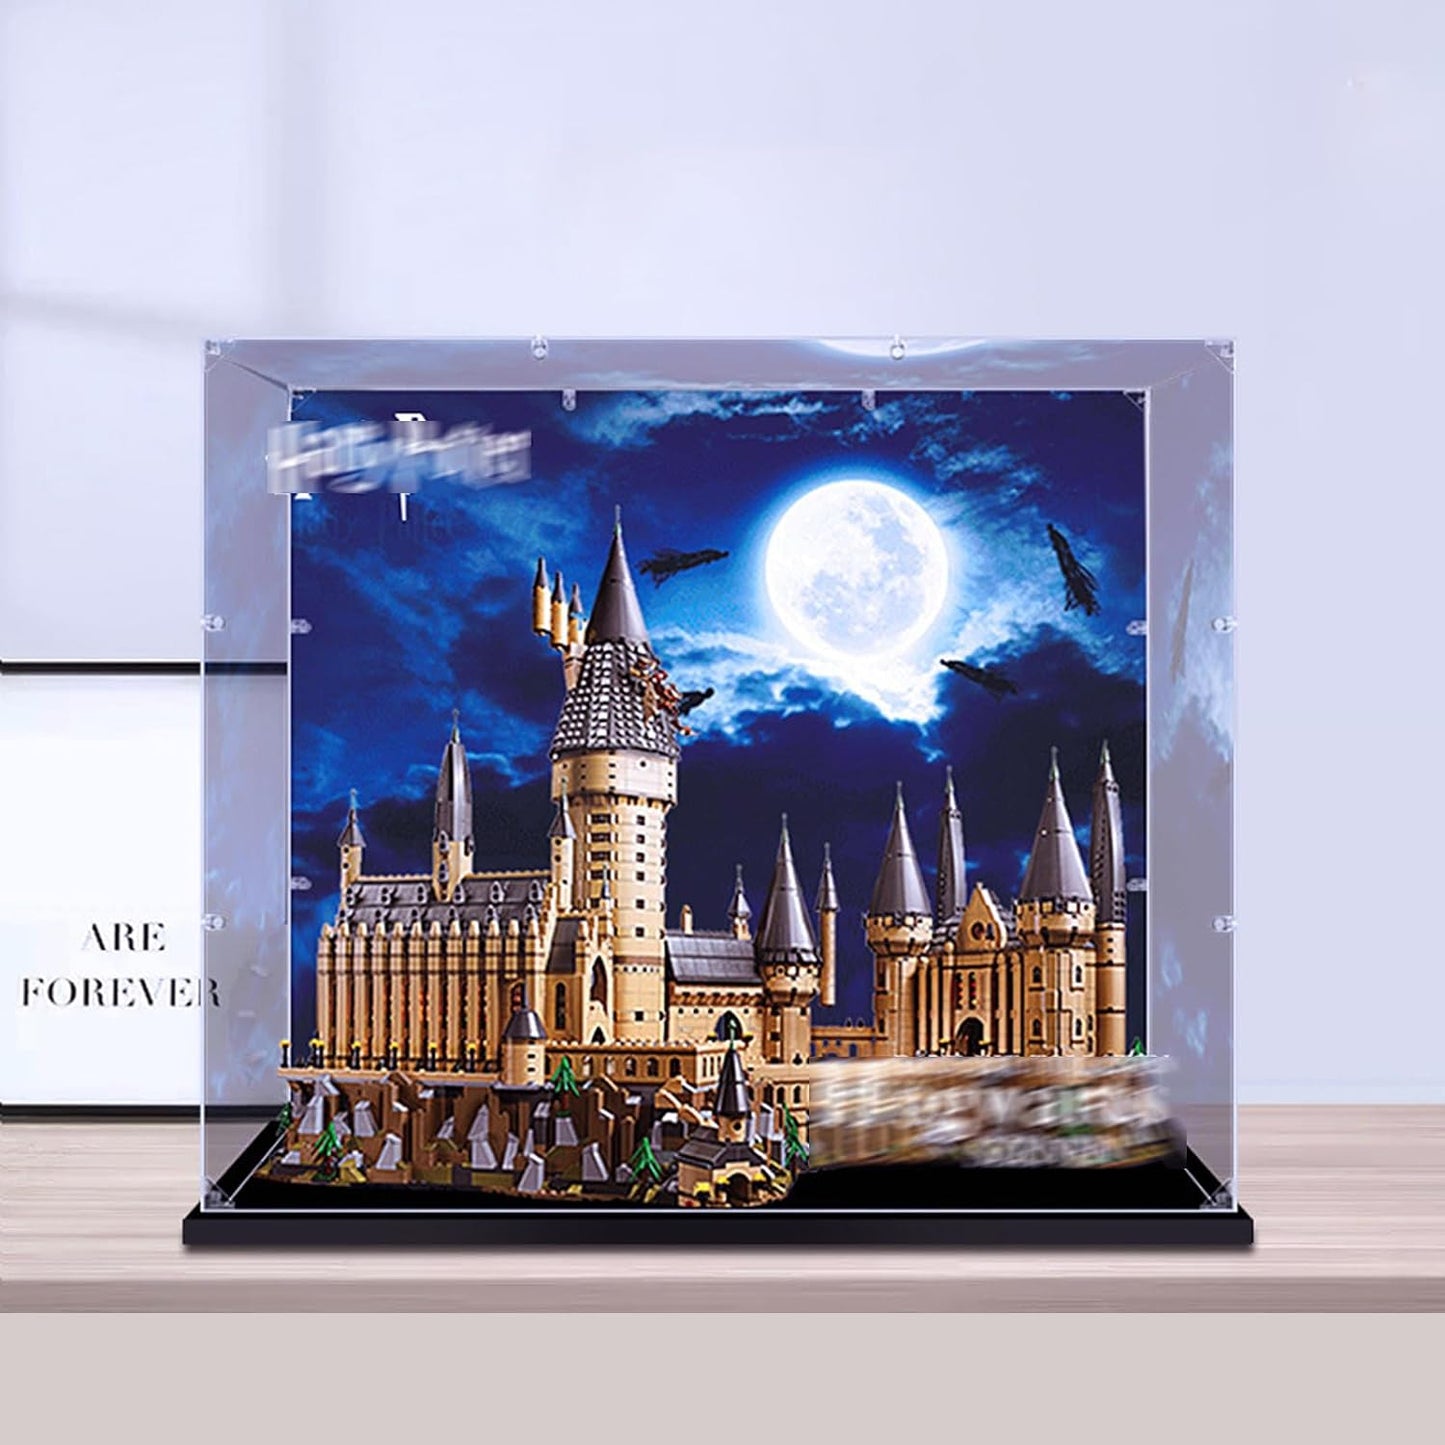 Acrylic Display Case Clear Show Box.Display Box for Lego Harry Potter Hogwarts Castle 71043 Building Model. (Only Storage Box,3mm) (Color base background version)